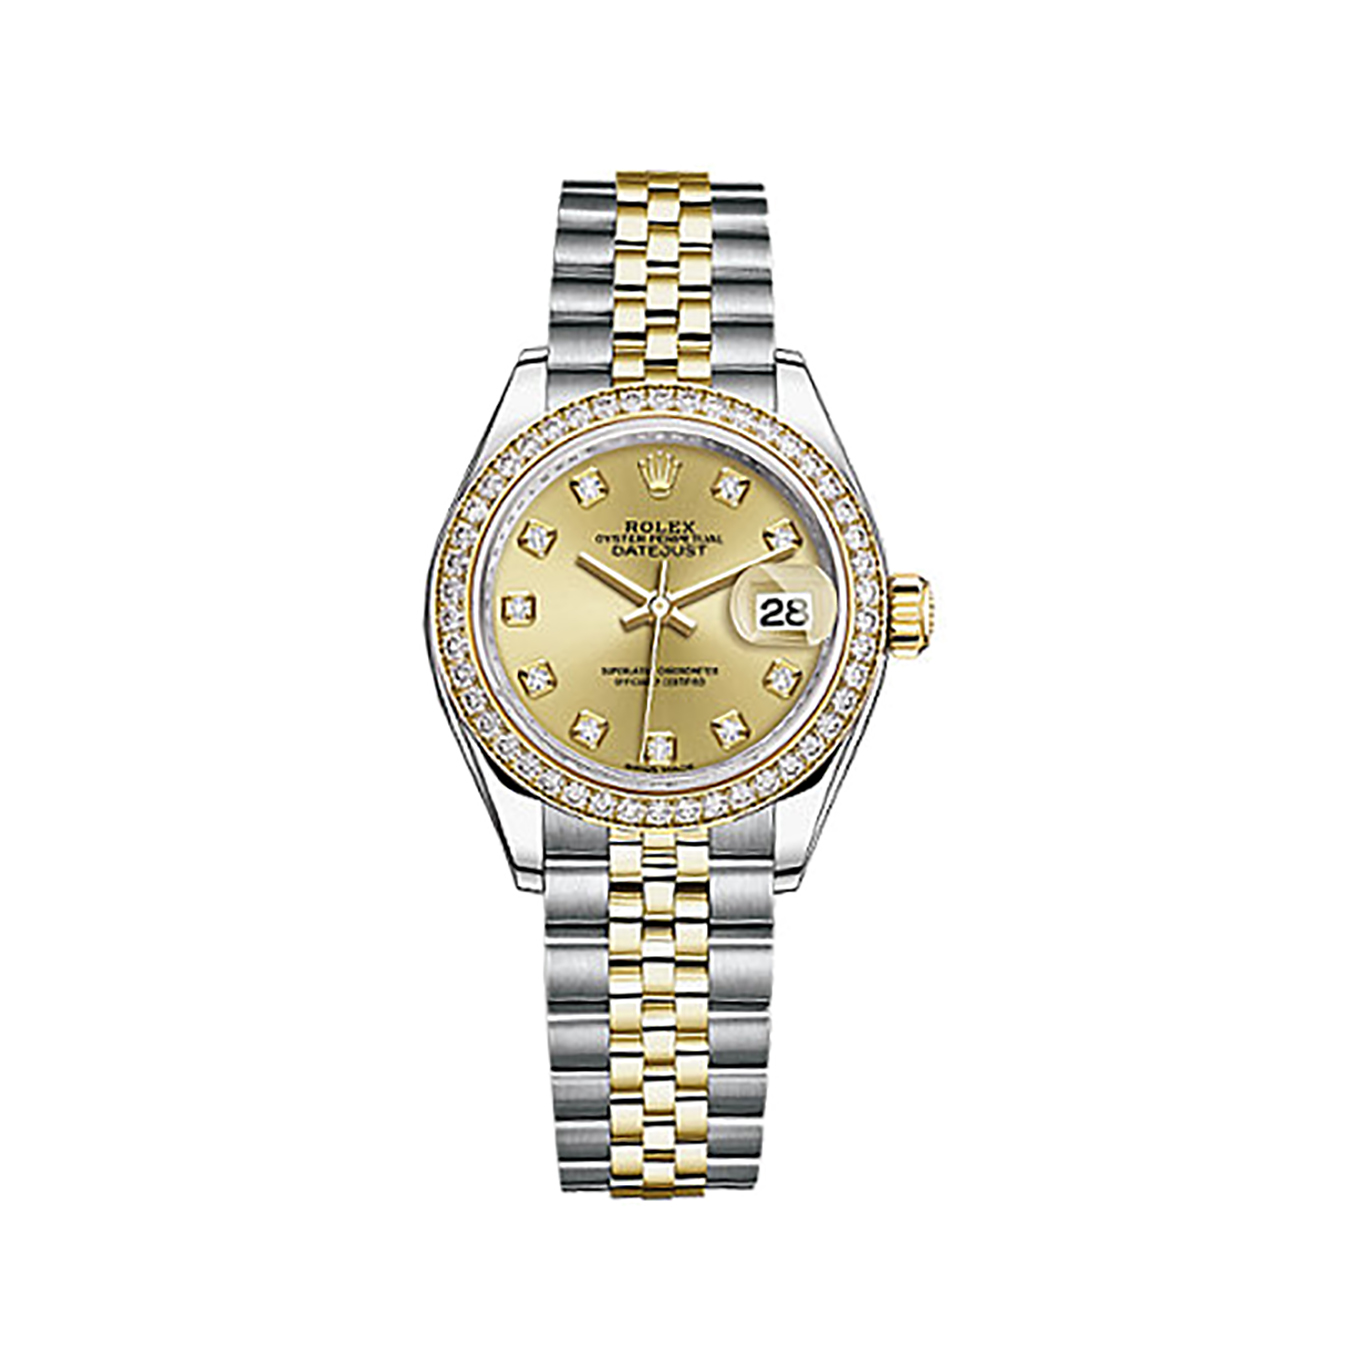 Lady-Datejust 28 279383RBR Gold & Stainless Steel & Diamonds Watch (Champagne Set with Diamonds) - Click Image to Close